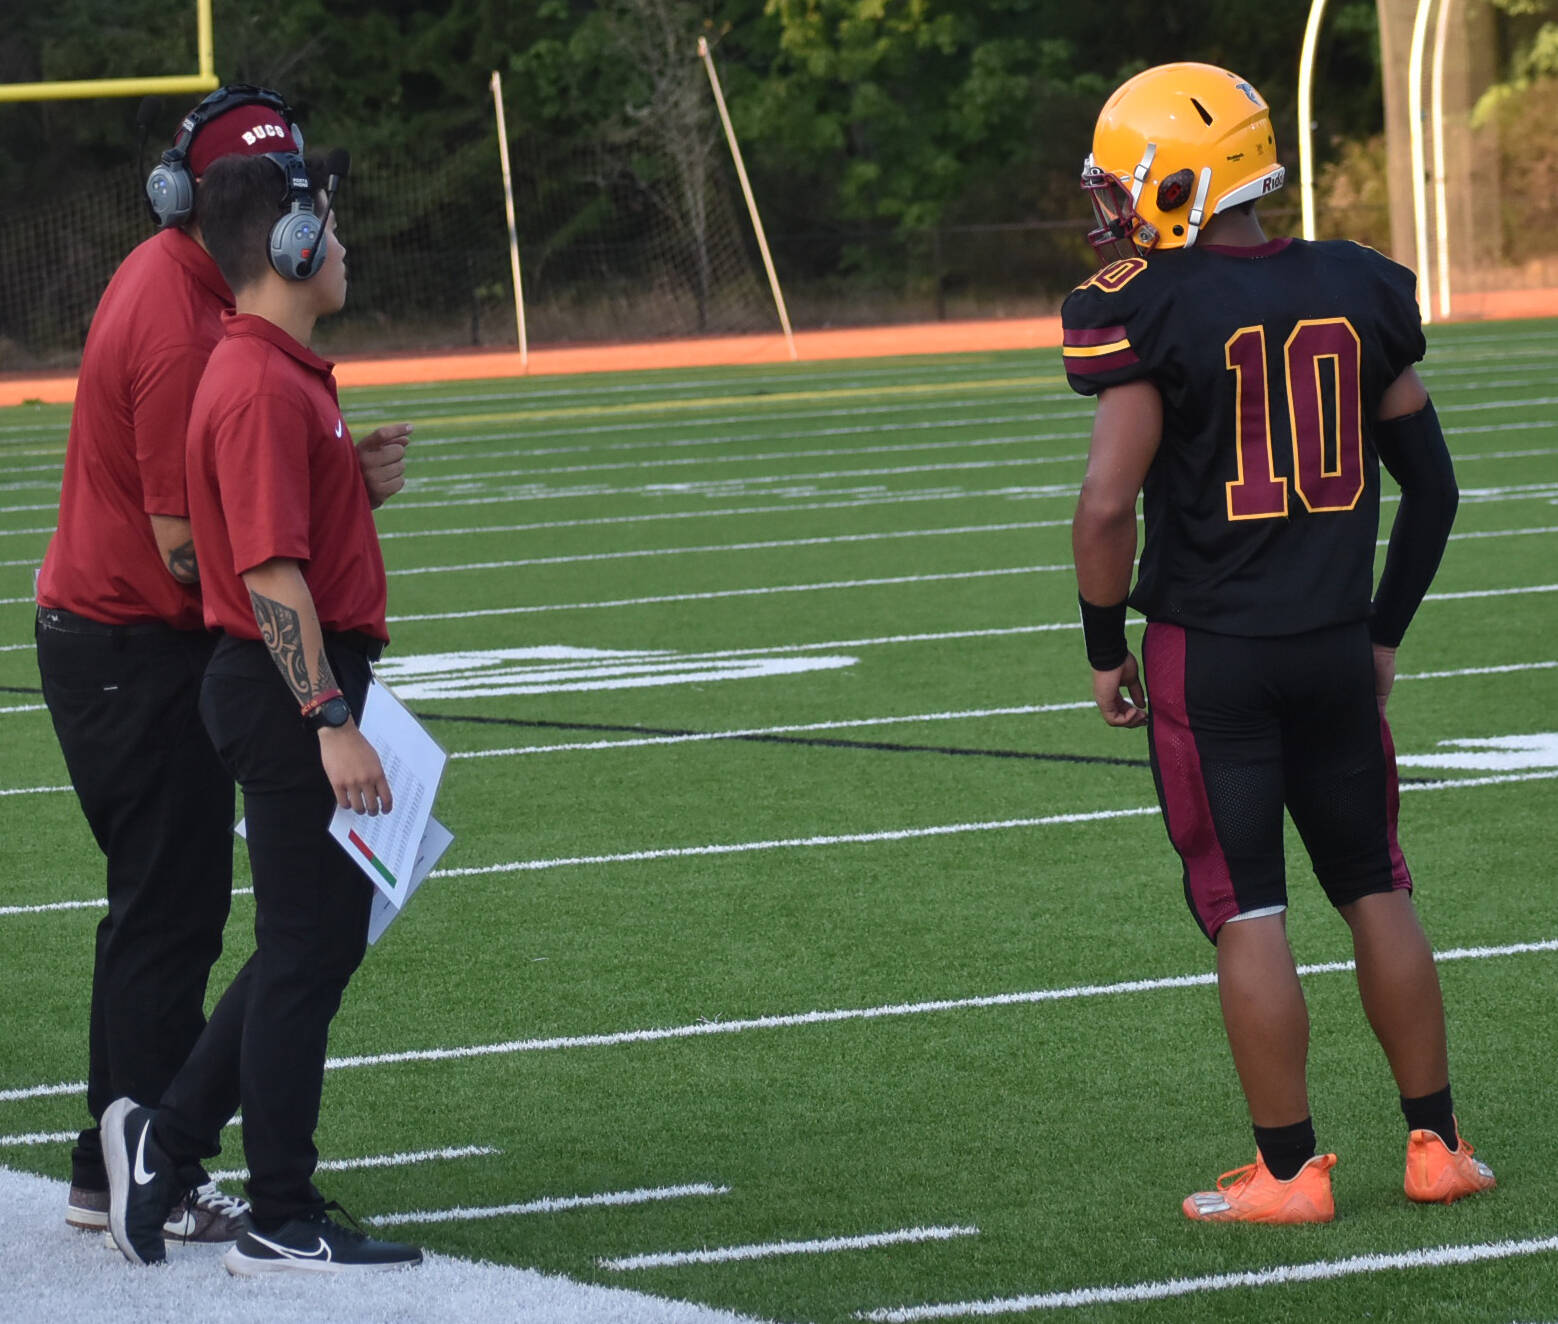 New Kingston coach Ethan Goldizen discusses the play with Swan on the sideline.